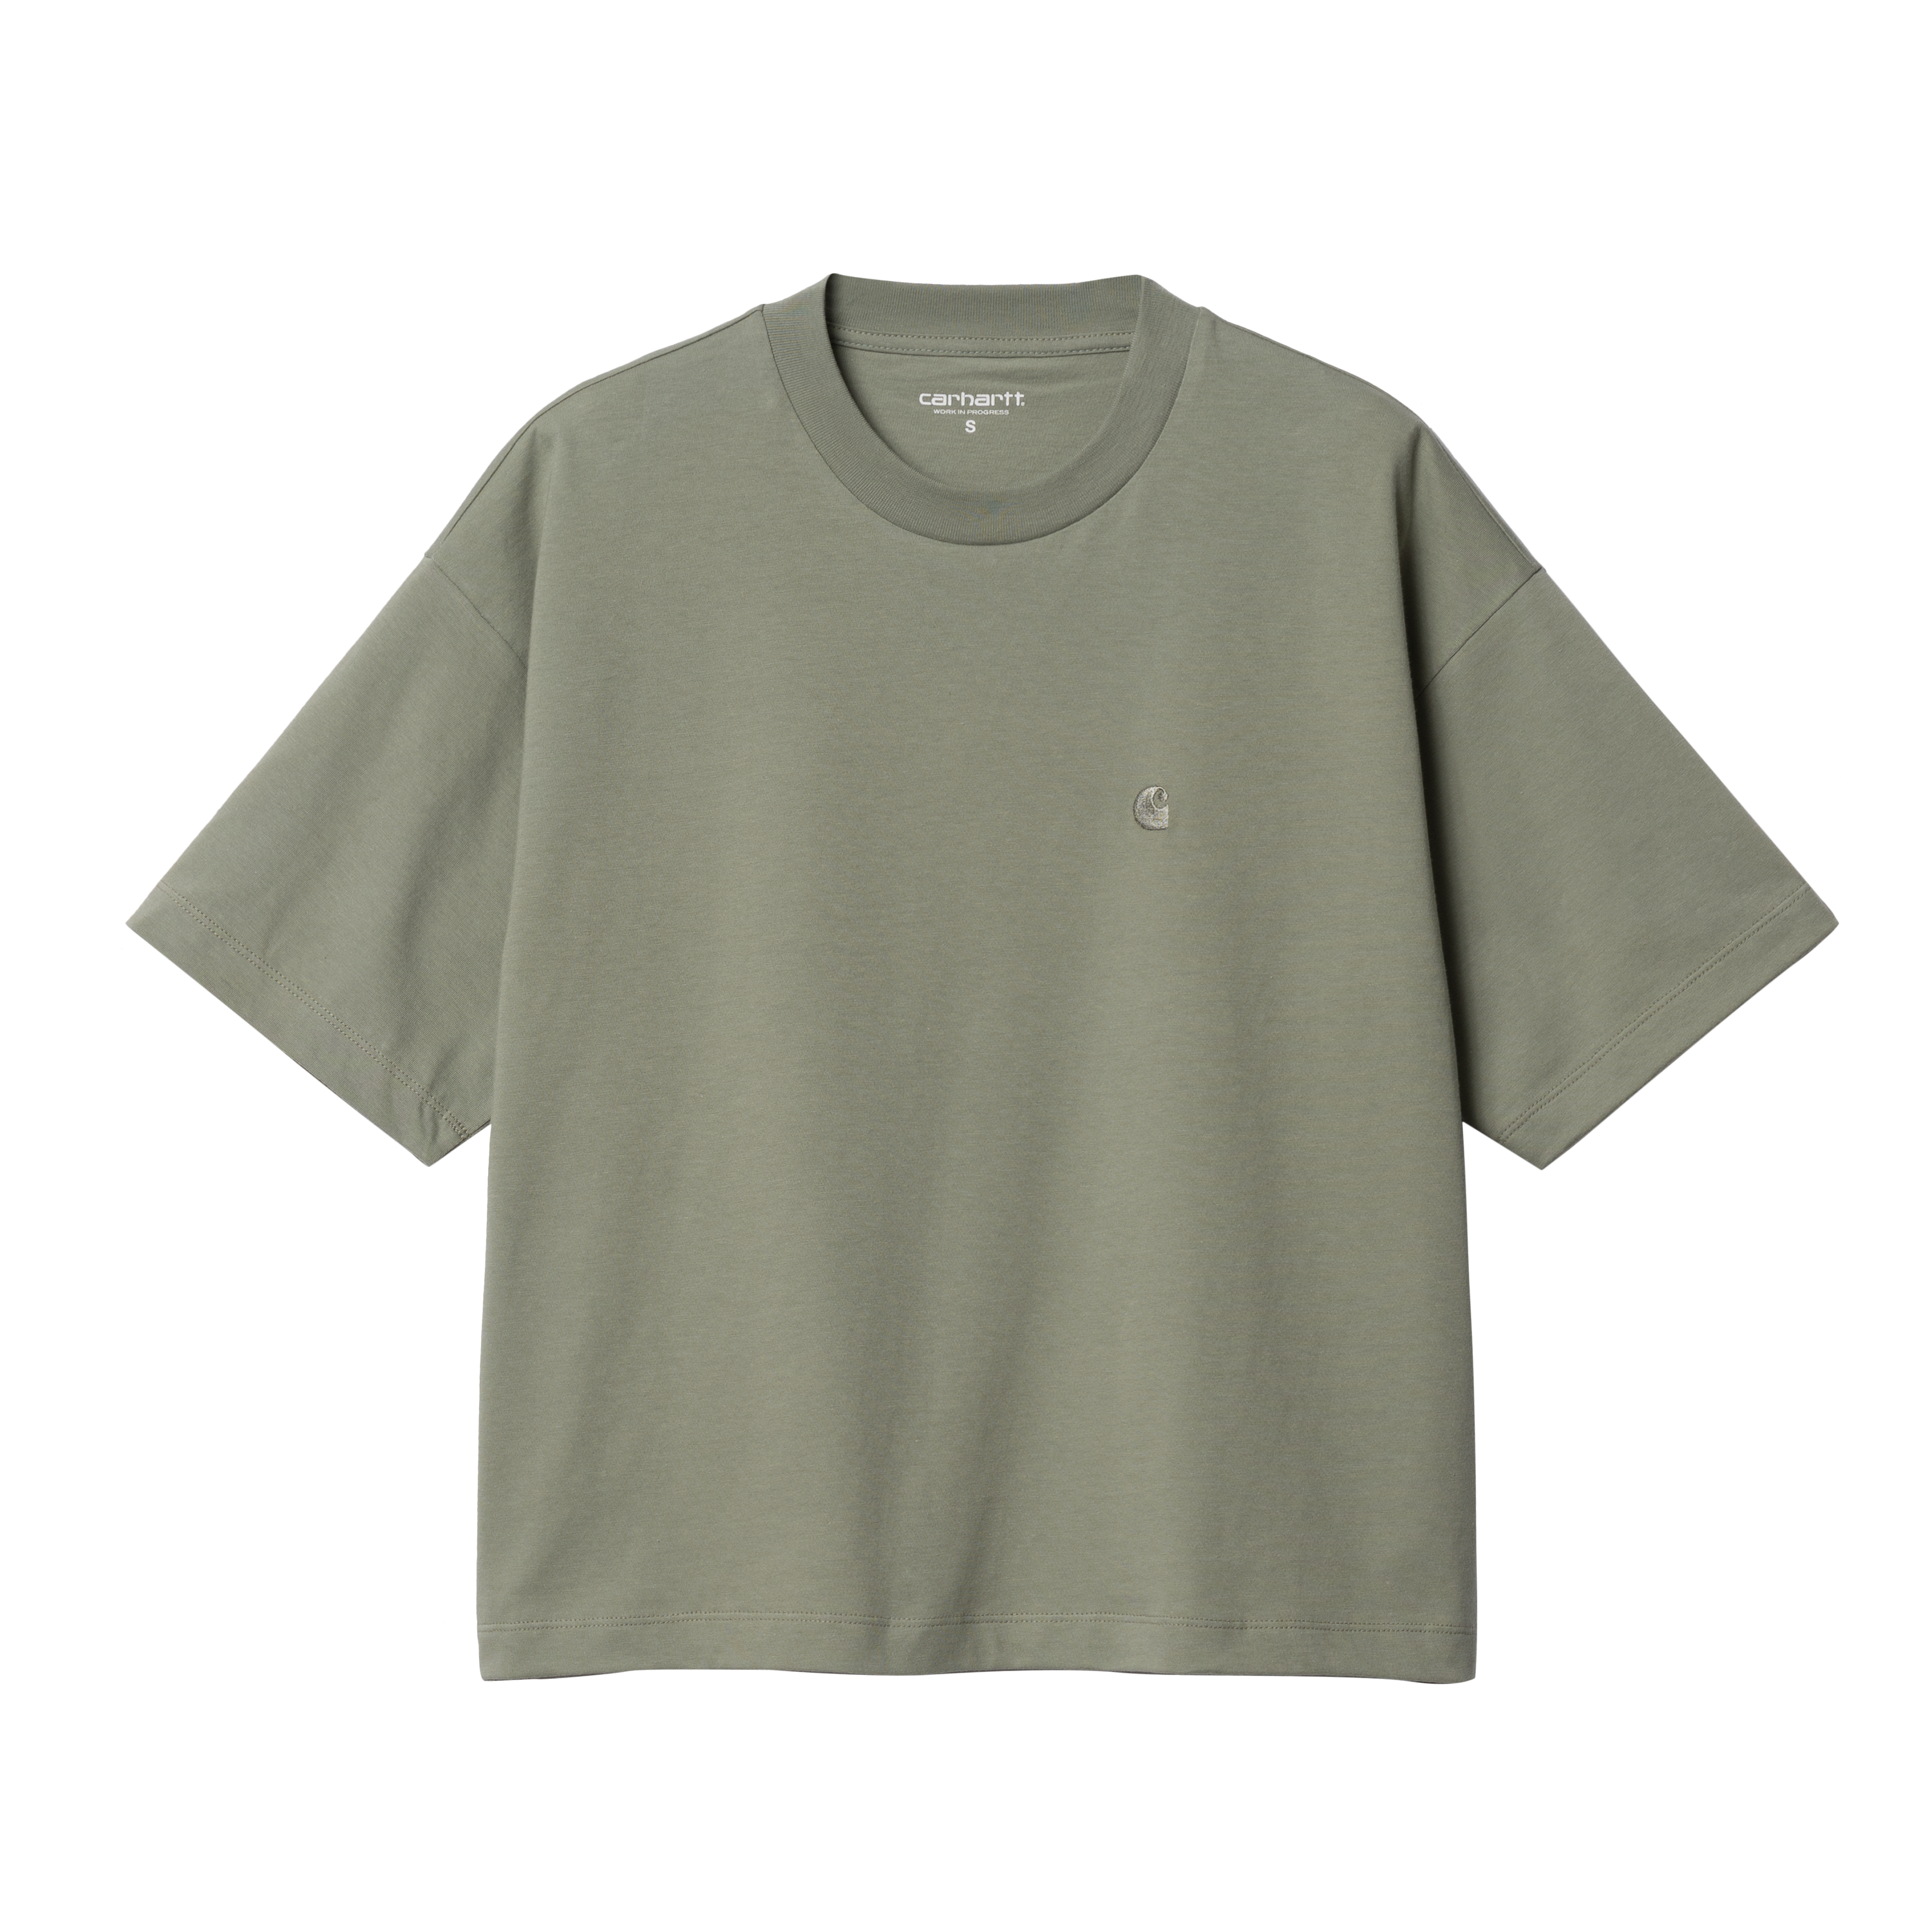 Carhartt WIP - W' S/S Chester T-Shirt - Yucca